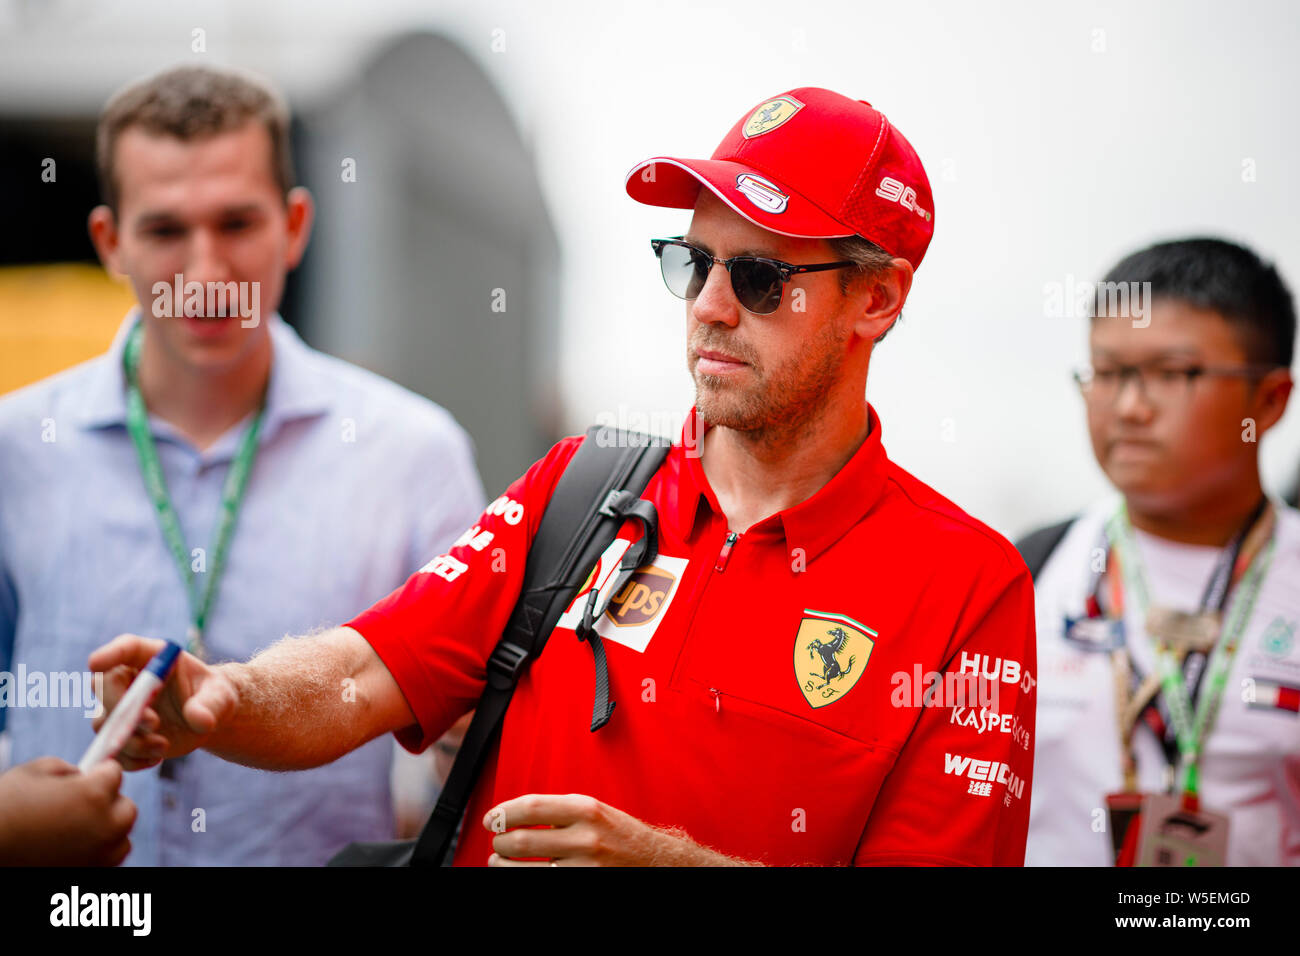 Hockenheim, Germany. 28th July, 2019. Sebastian Vettel of Germany walks through the paddock prior to the start of the German F1 Grand Prix race. Credit: SOPA Images Limited/Alamy Live News Stock Photo